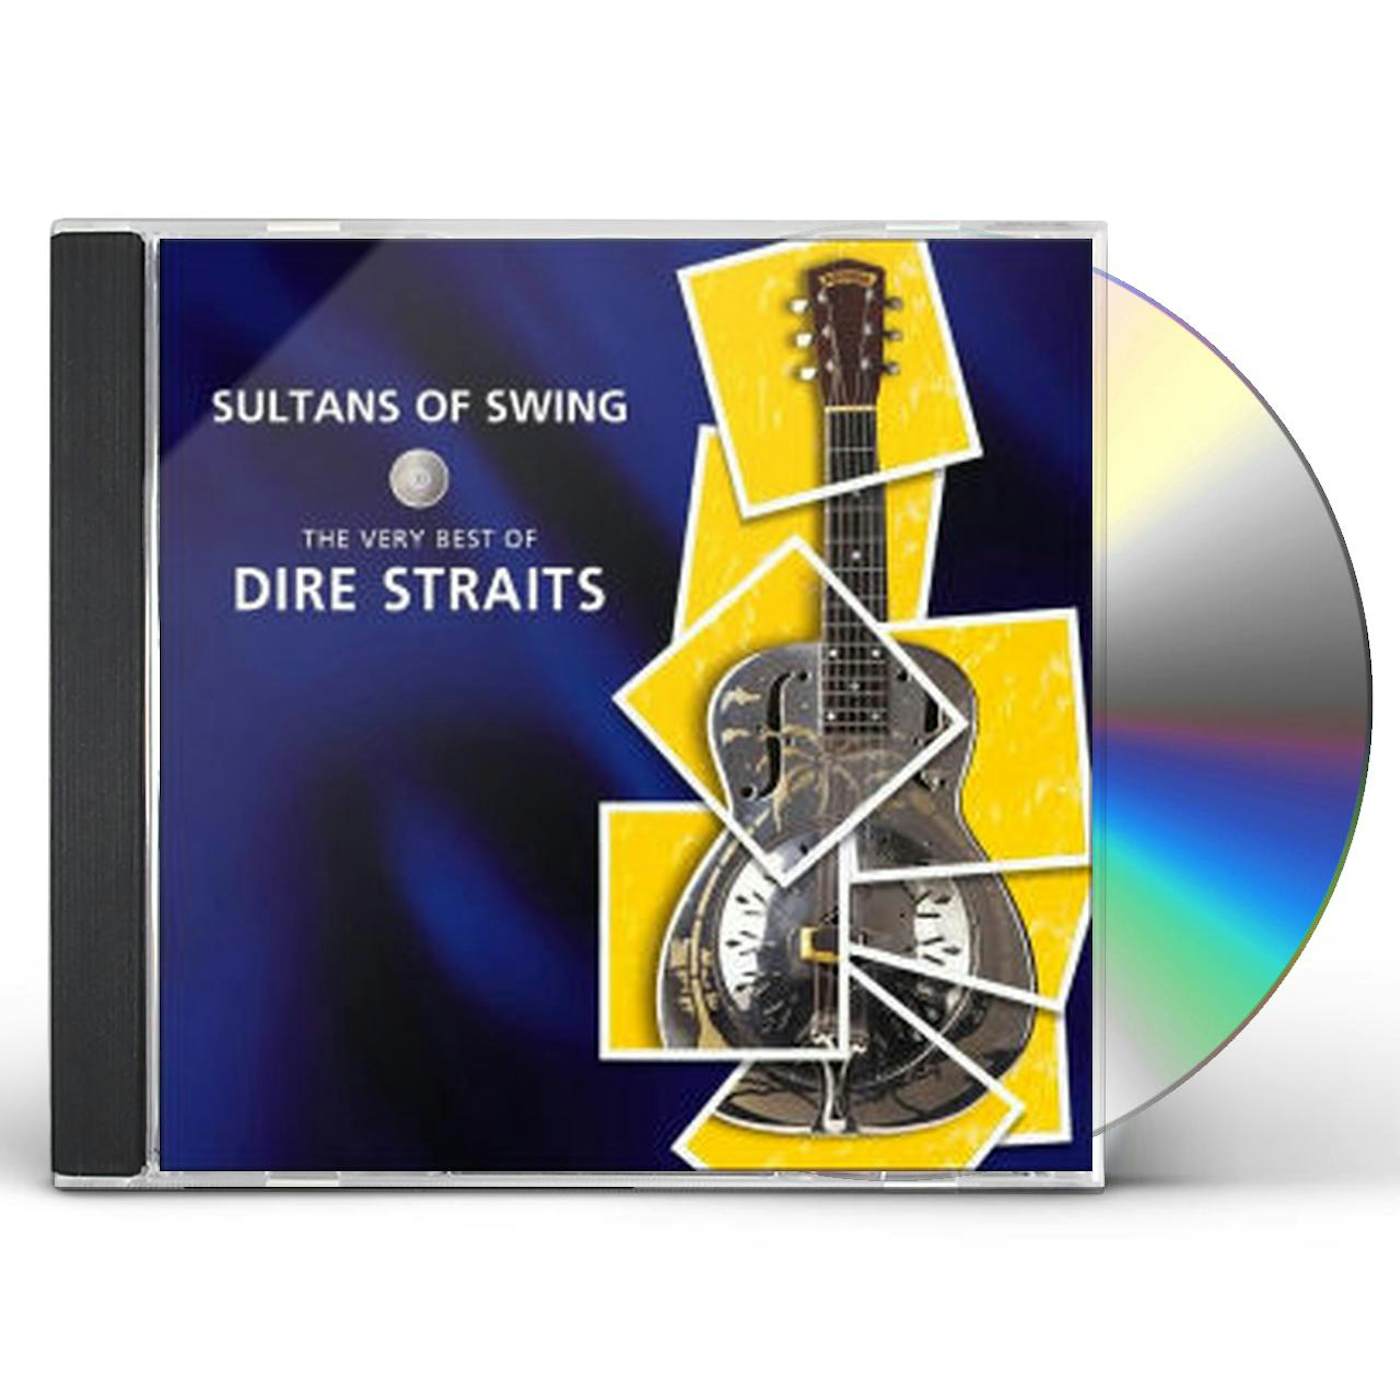 Dire Straits SULTANS OF SWING - VERY BEST OF CD $16.49$14.99